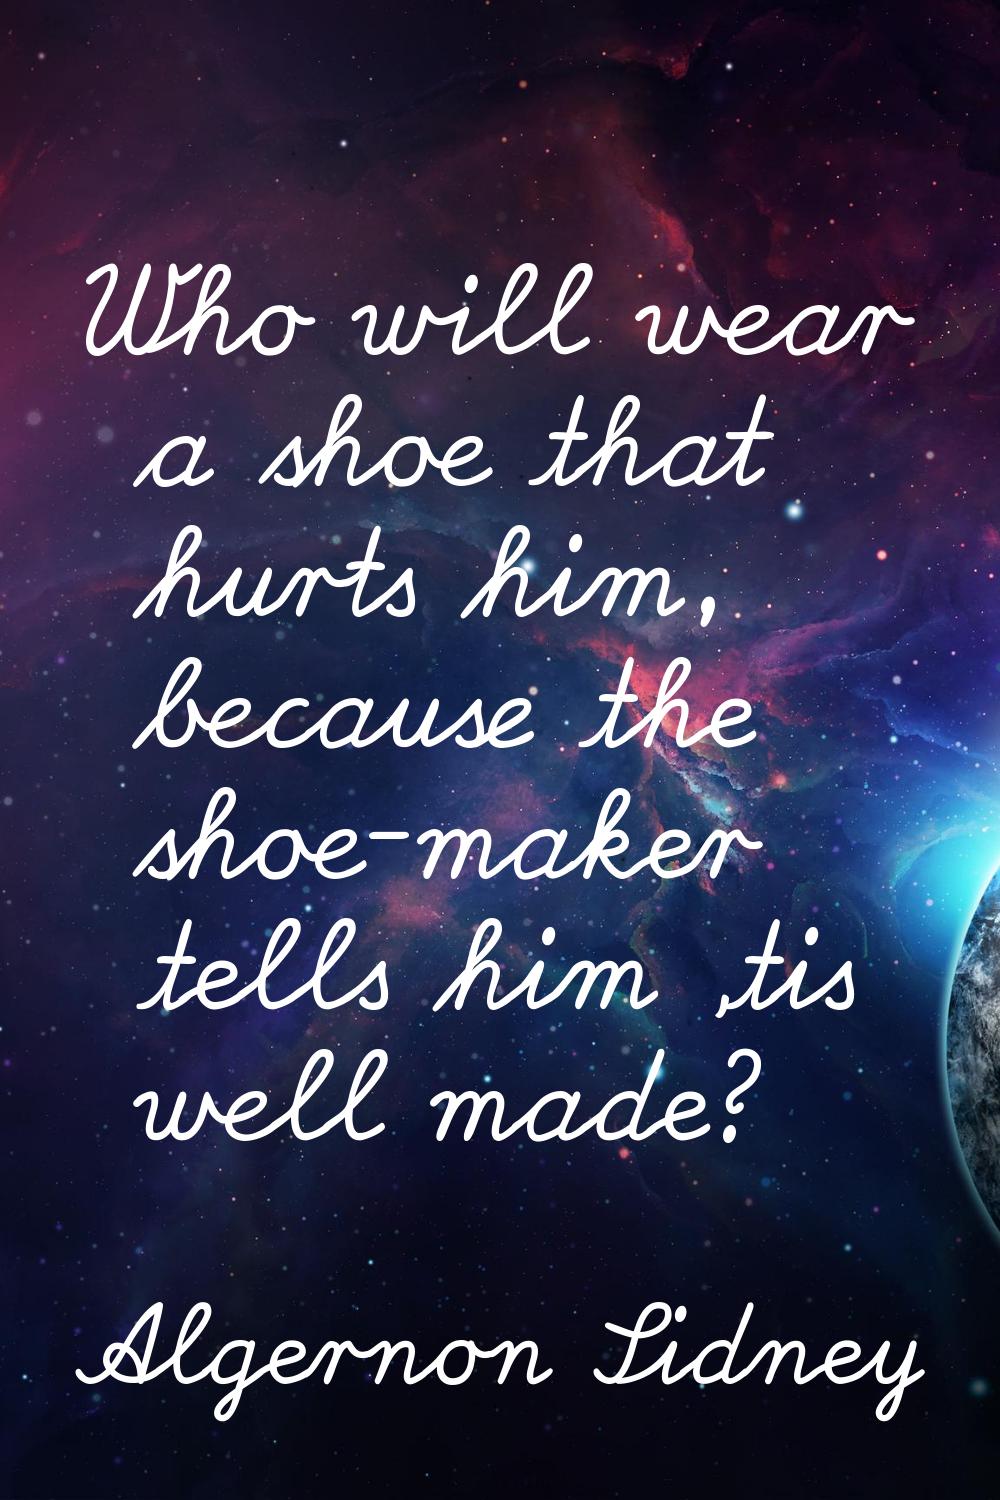 Who will wear a shoe that hurts him, because the shoe-maker tells him 'tis well made?